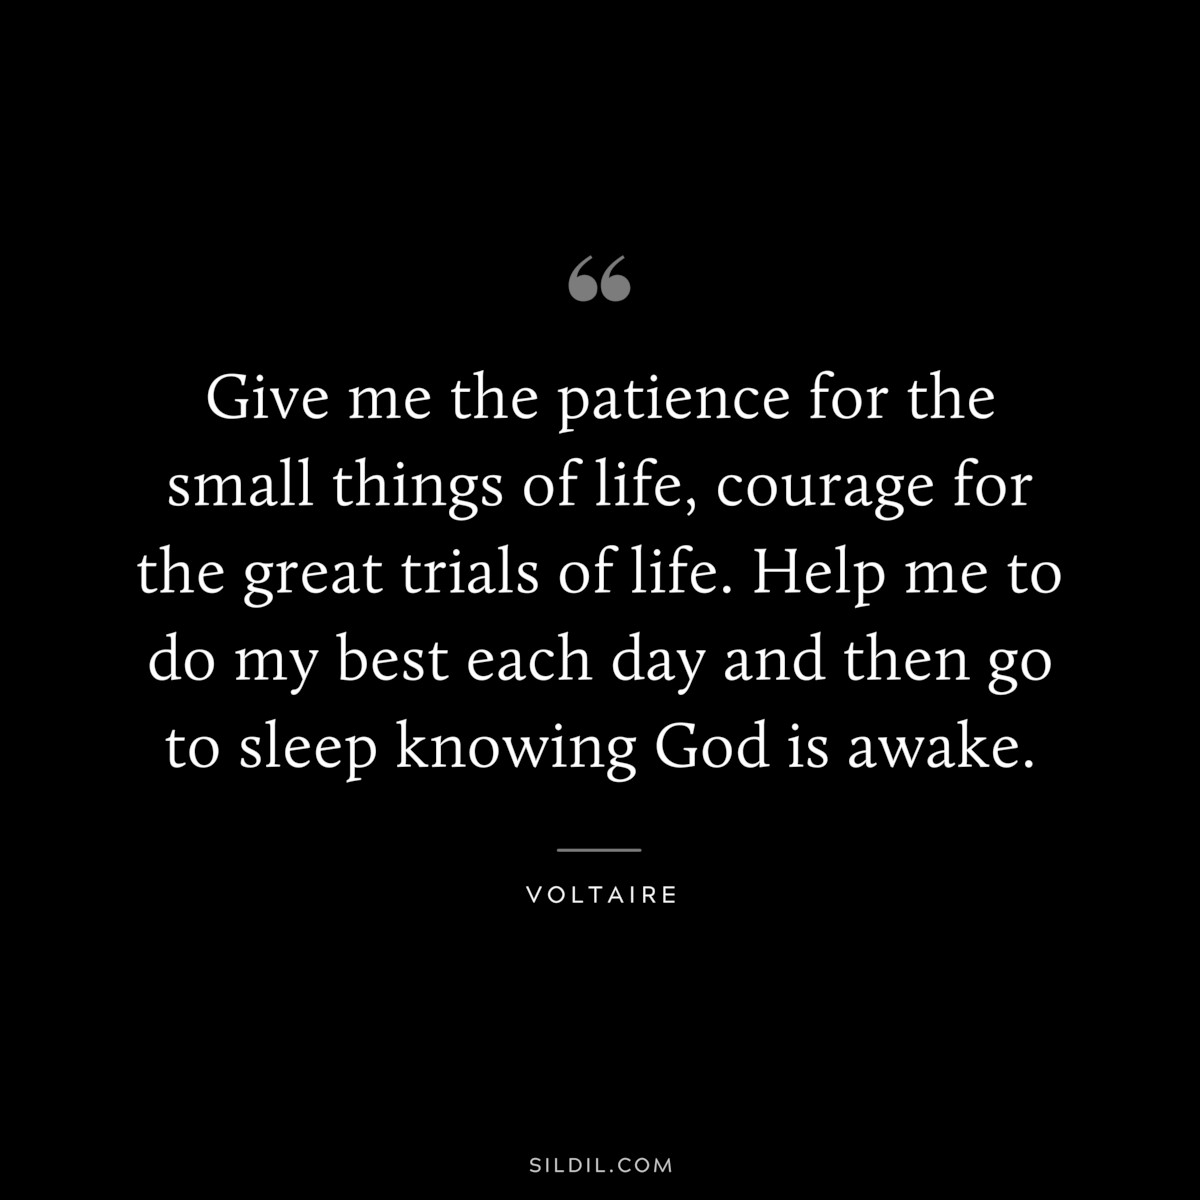 Give me the patience for the small things of life, courage for the great trials of life. Help me to do my best each day and then go to sleep knowing God is awake. ― Voltaire